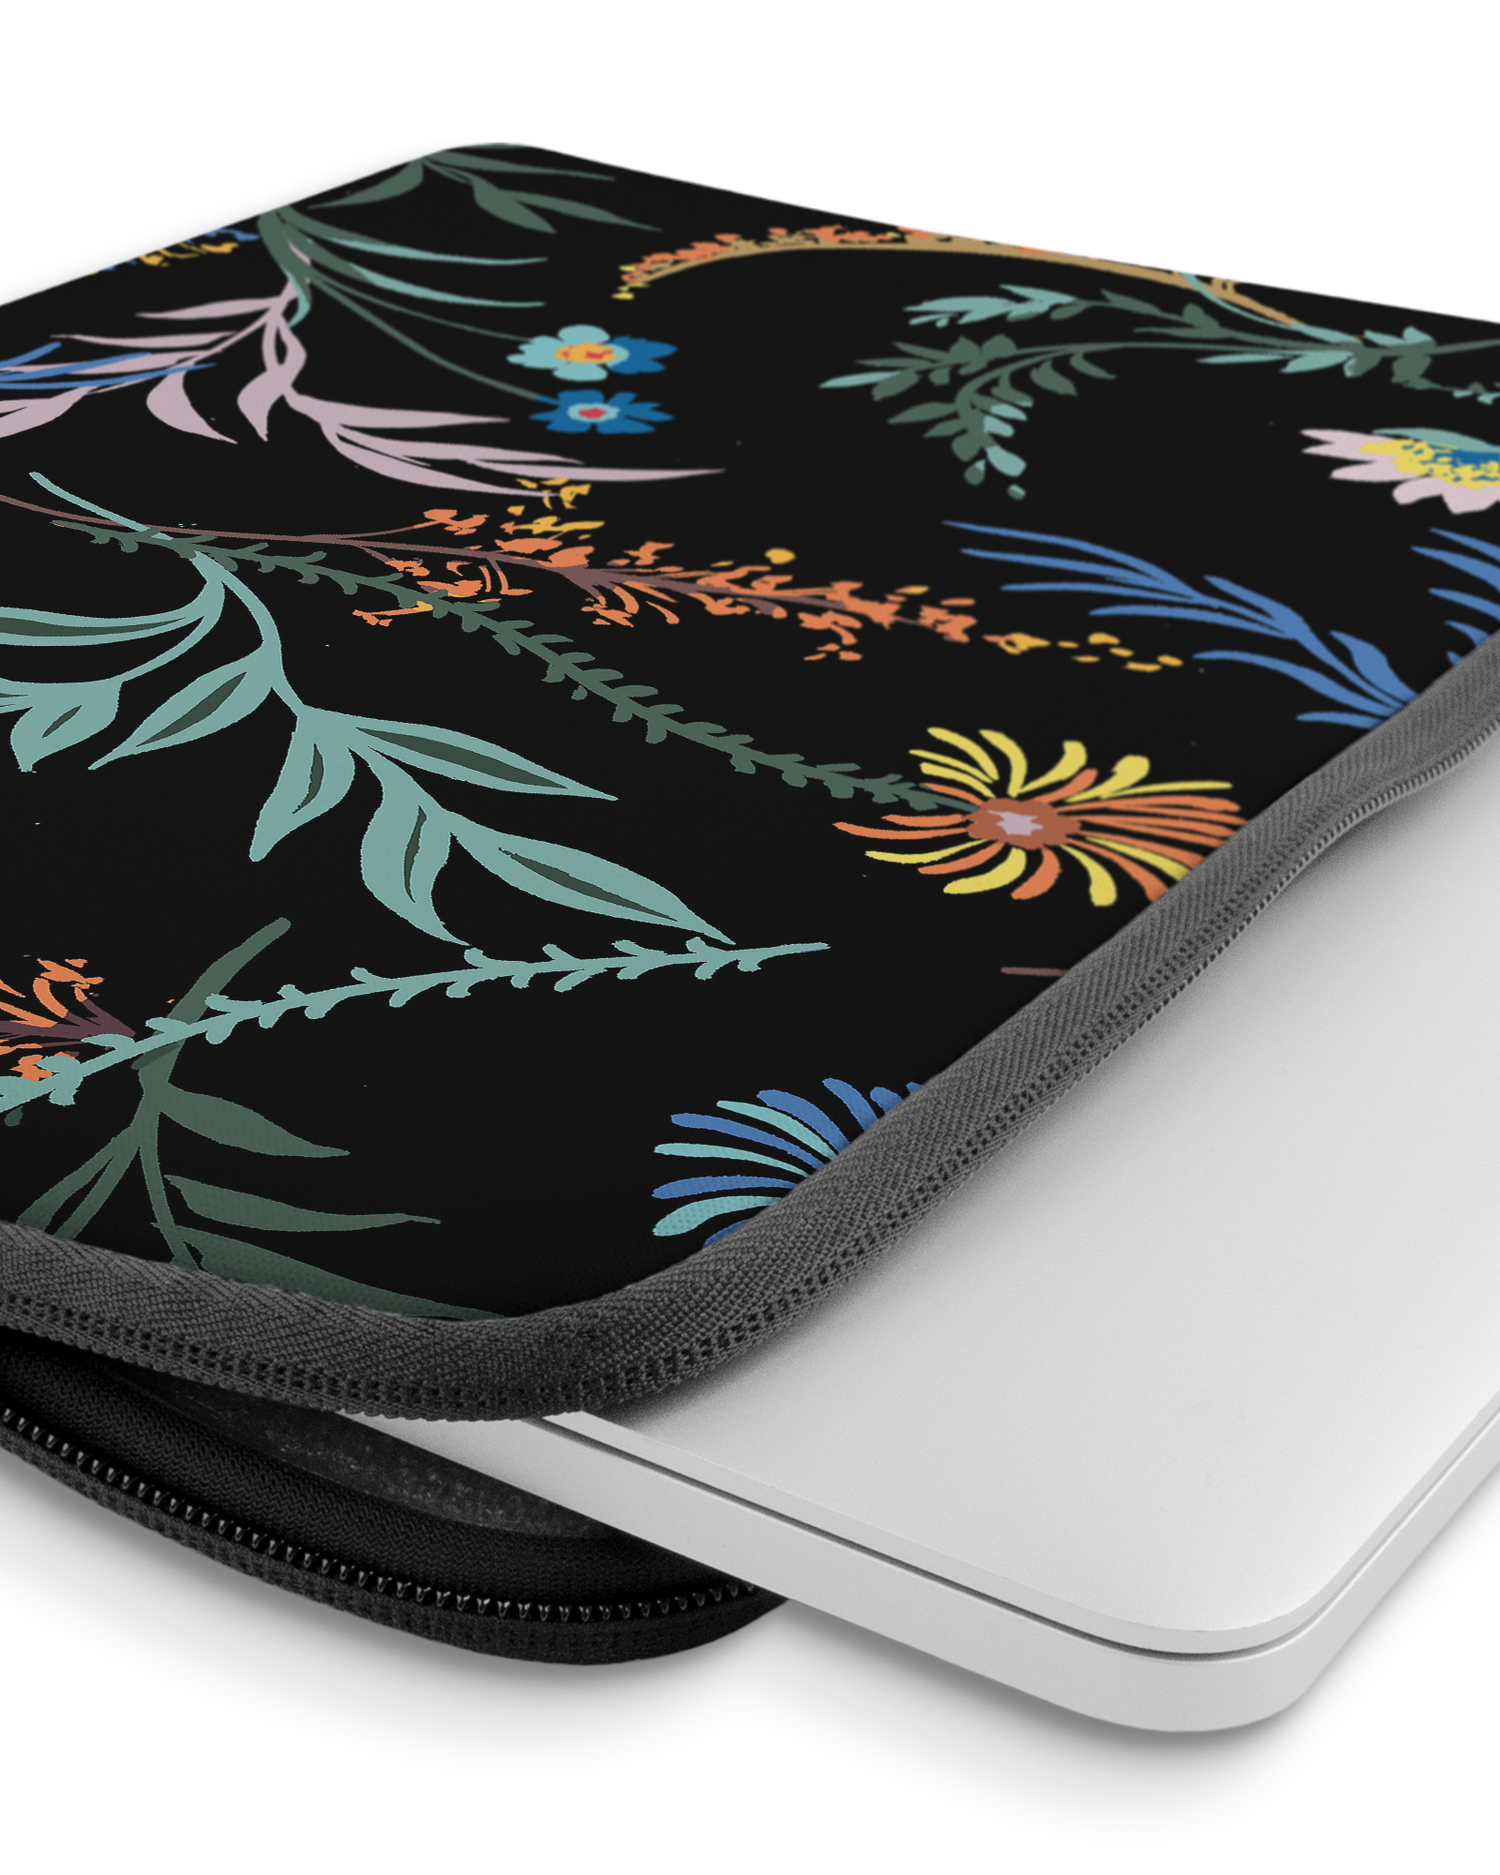 Woodland Spring Floral Laptop Case 14 inch with device inside